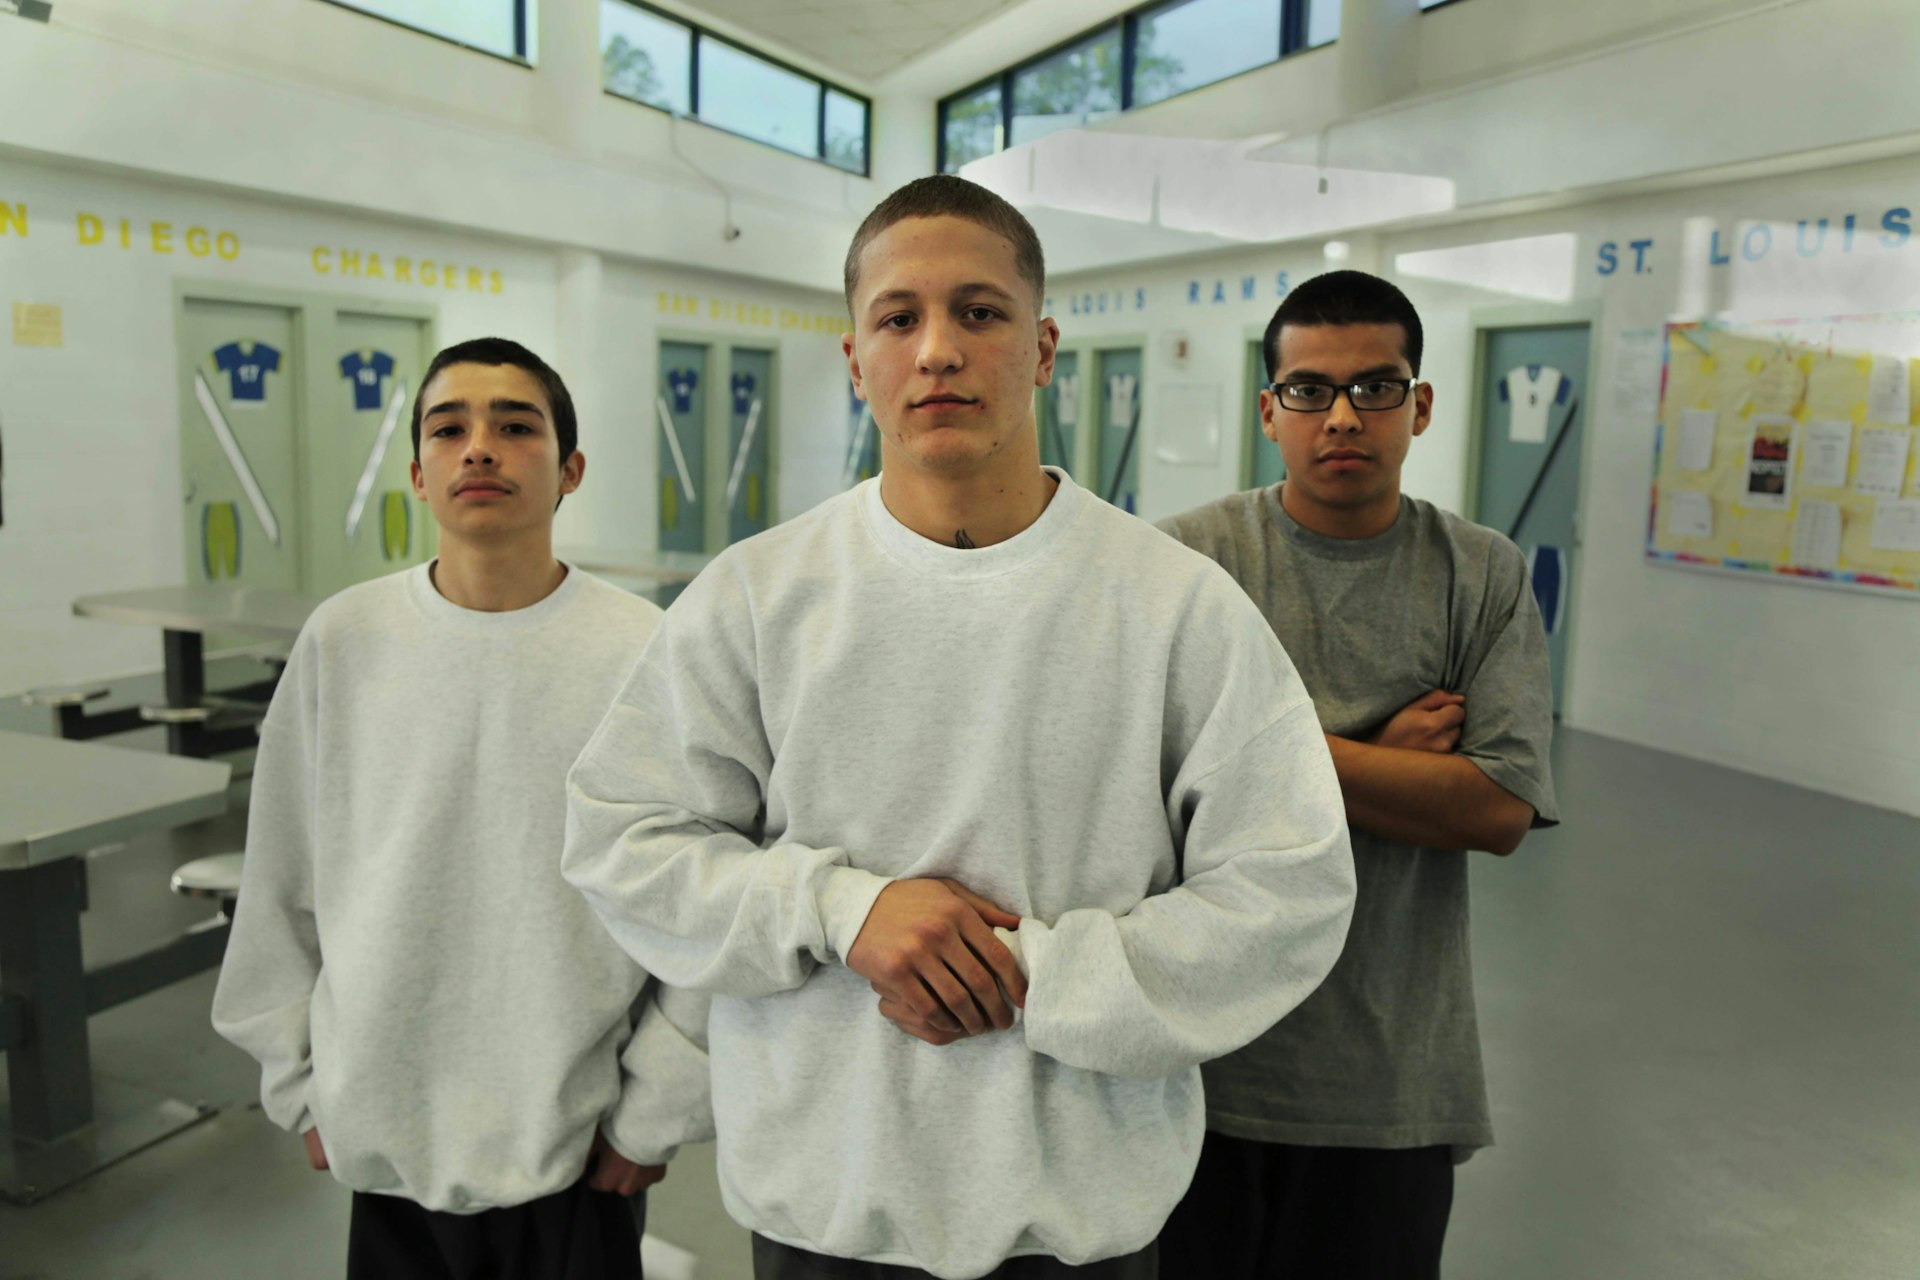 The American teenagers facing life in prison for violent crimes